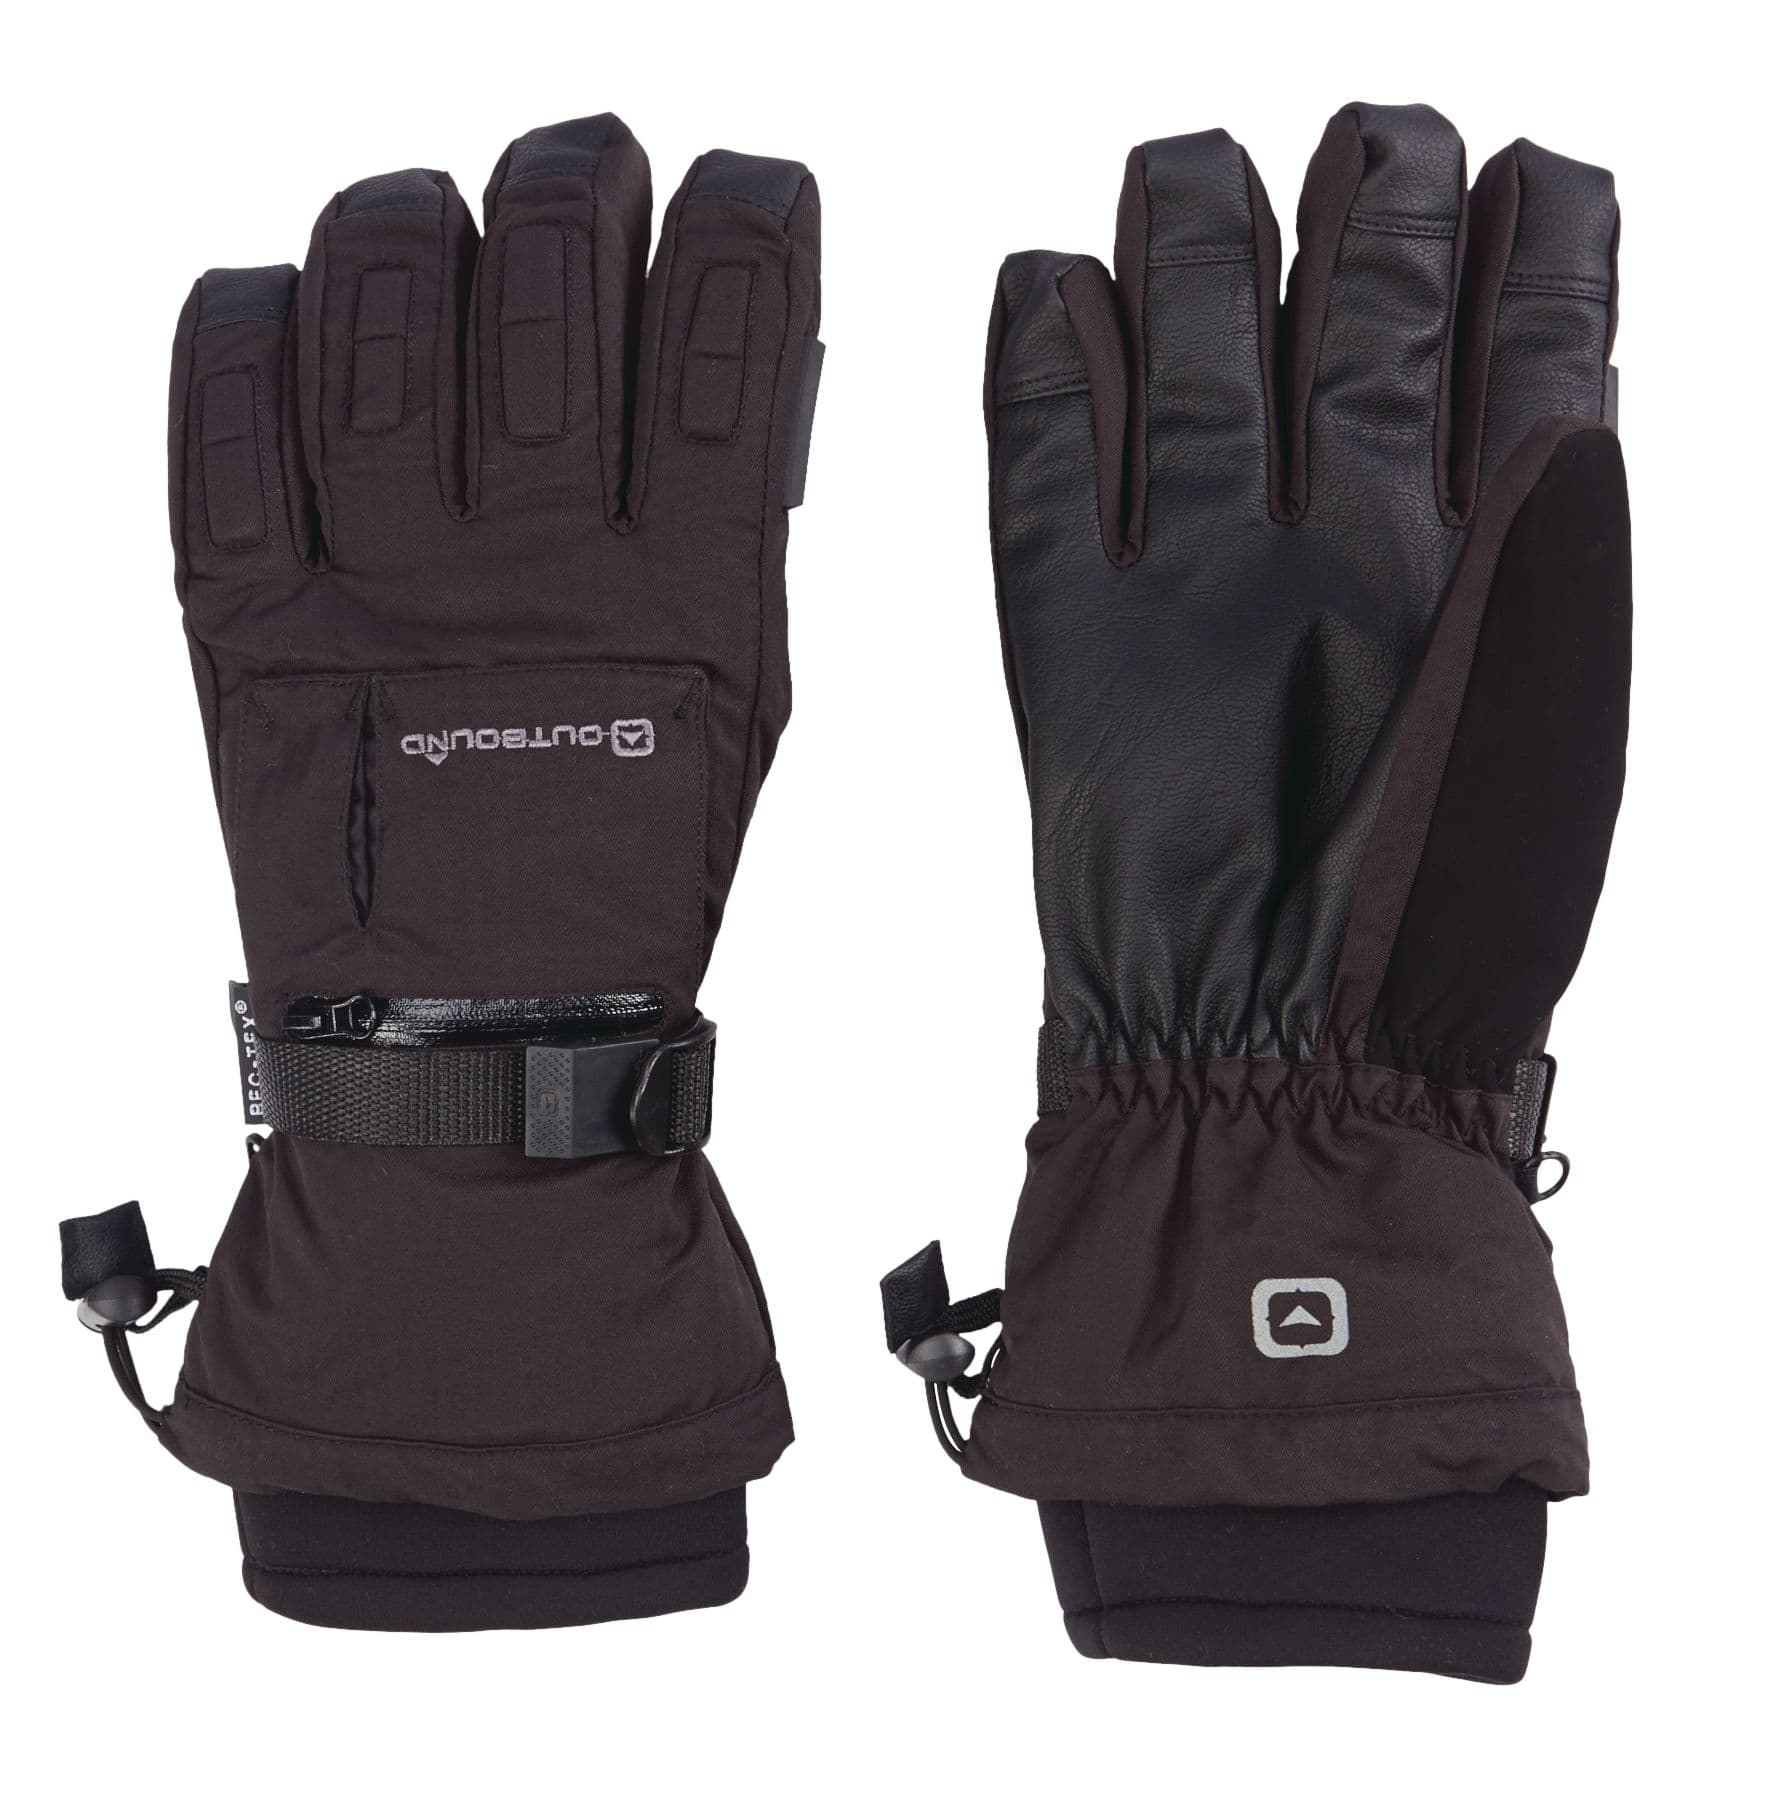 https://media-www.canadiantire.ca/product/playing/footwear-apparel/winter-footwear-apparel/1870857/outbound-performance-ski-glove-mens-black-large-x-large-fac6ec78-04c8-439a-92a2-0e363642e339-jpgrendition.jpg